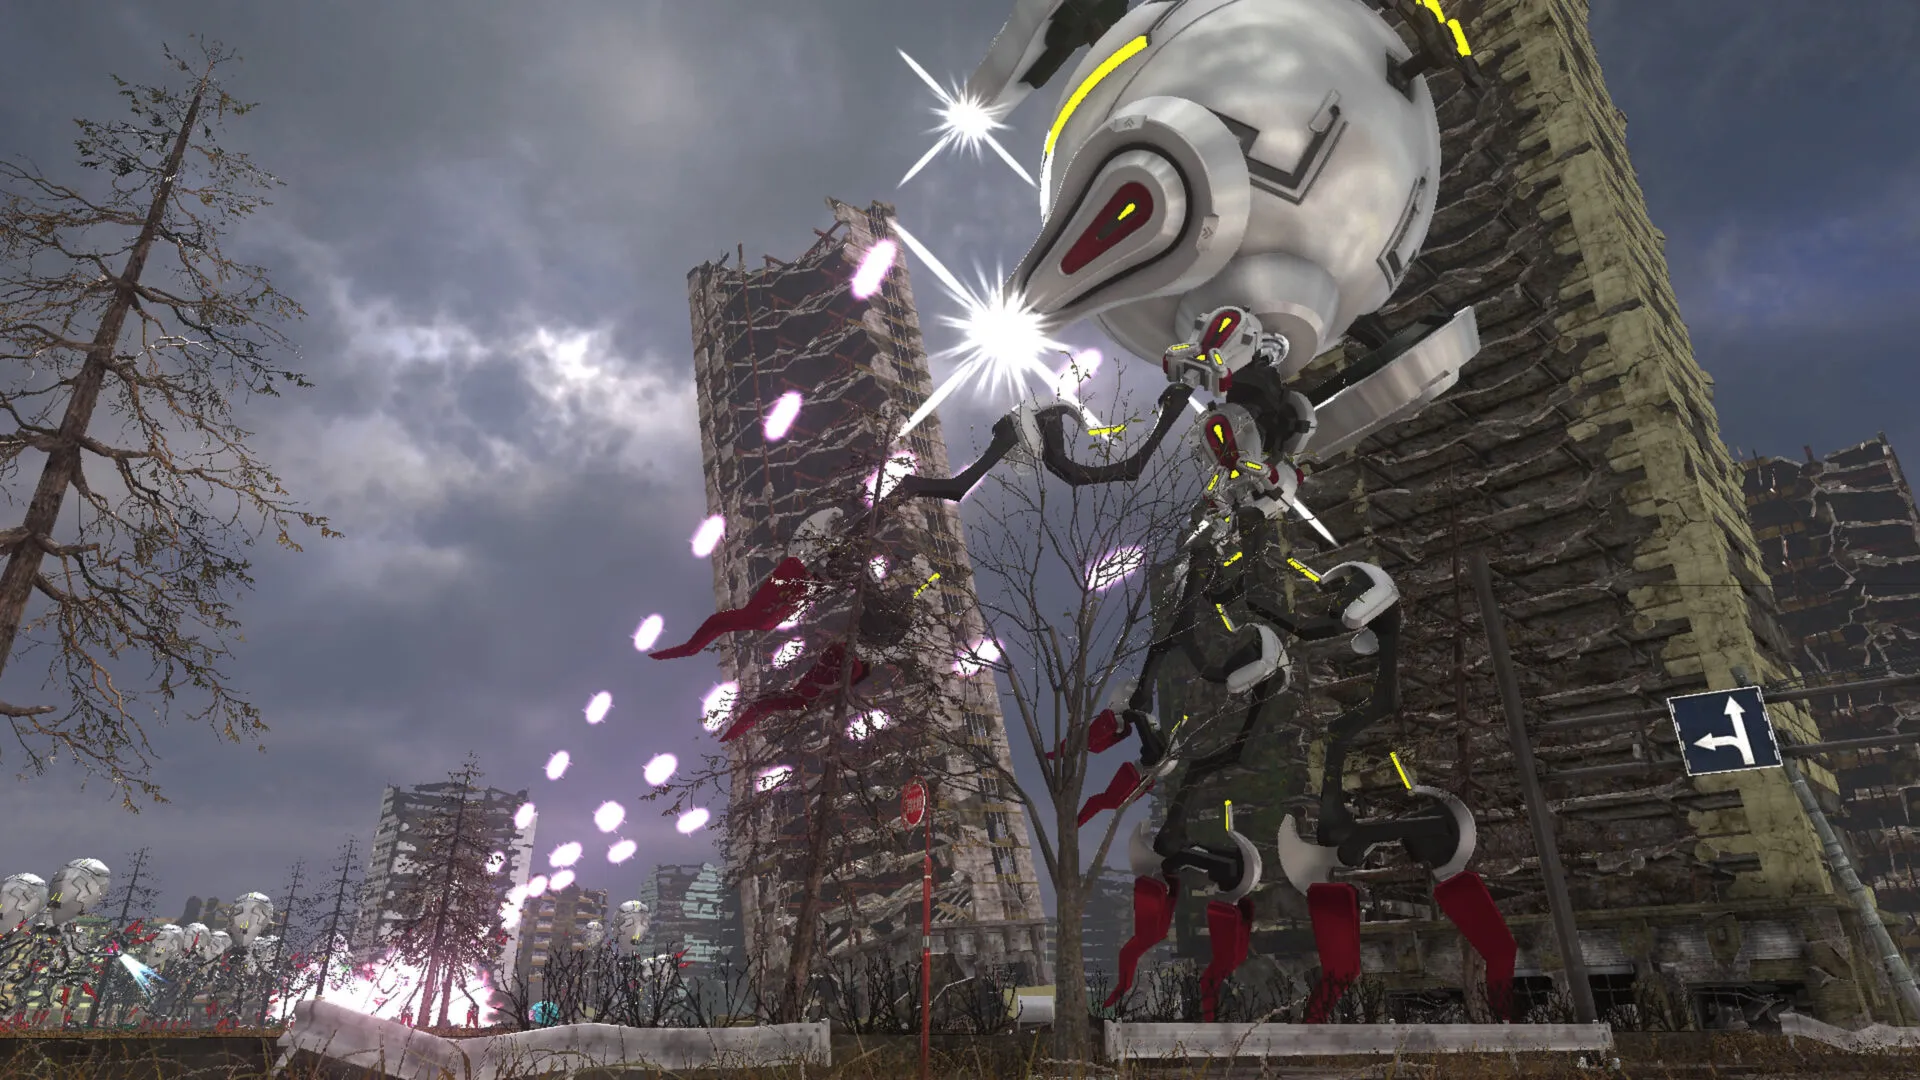 Earth Defense Force 6 Reveals Tons of New Screenshots Showing Aliens Aplenty & More